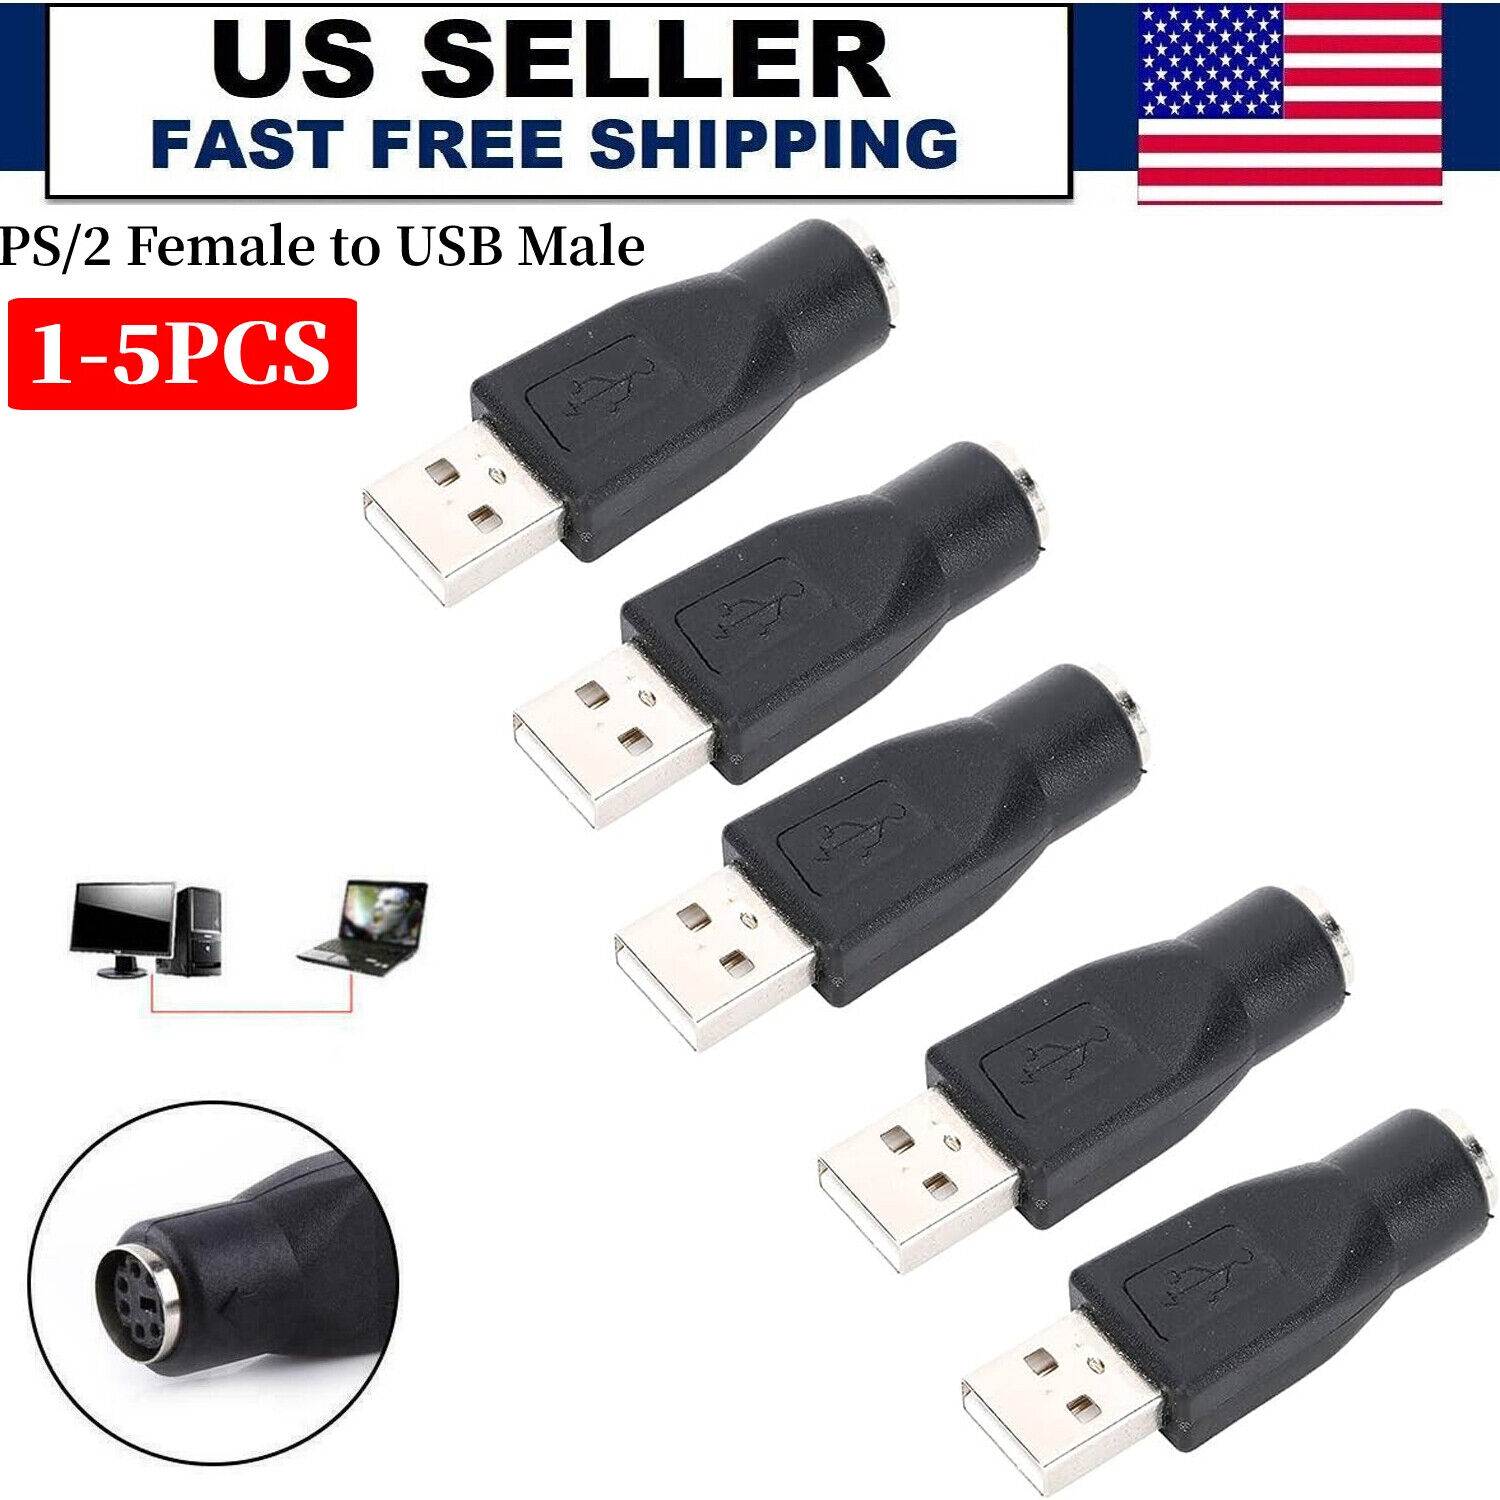 1-5pcs PS/2 PS2 Male to USB Female Adapter Converter Connector For PC Mouse Mice